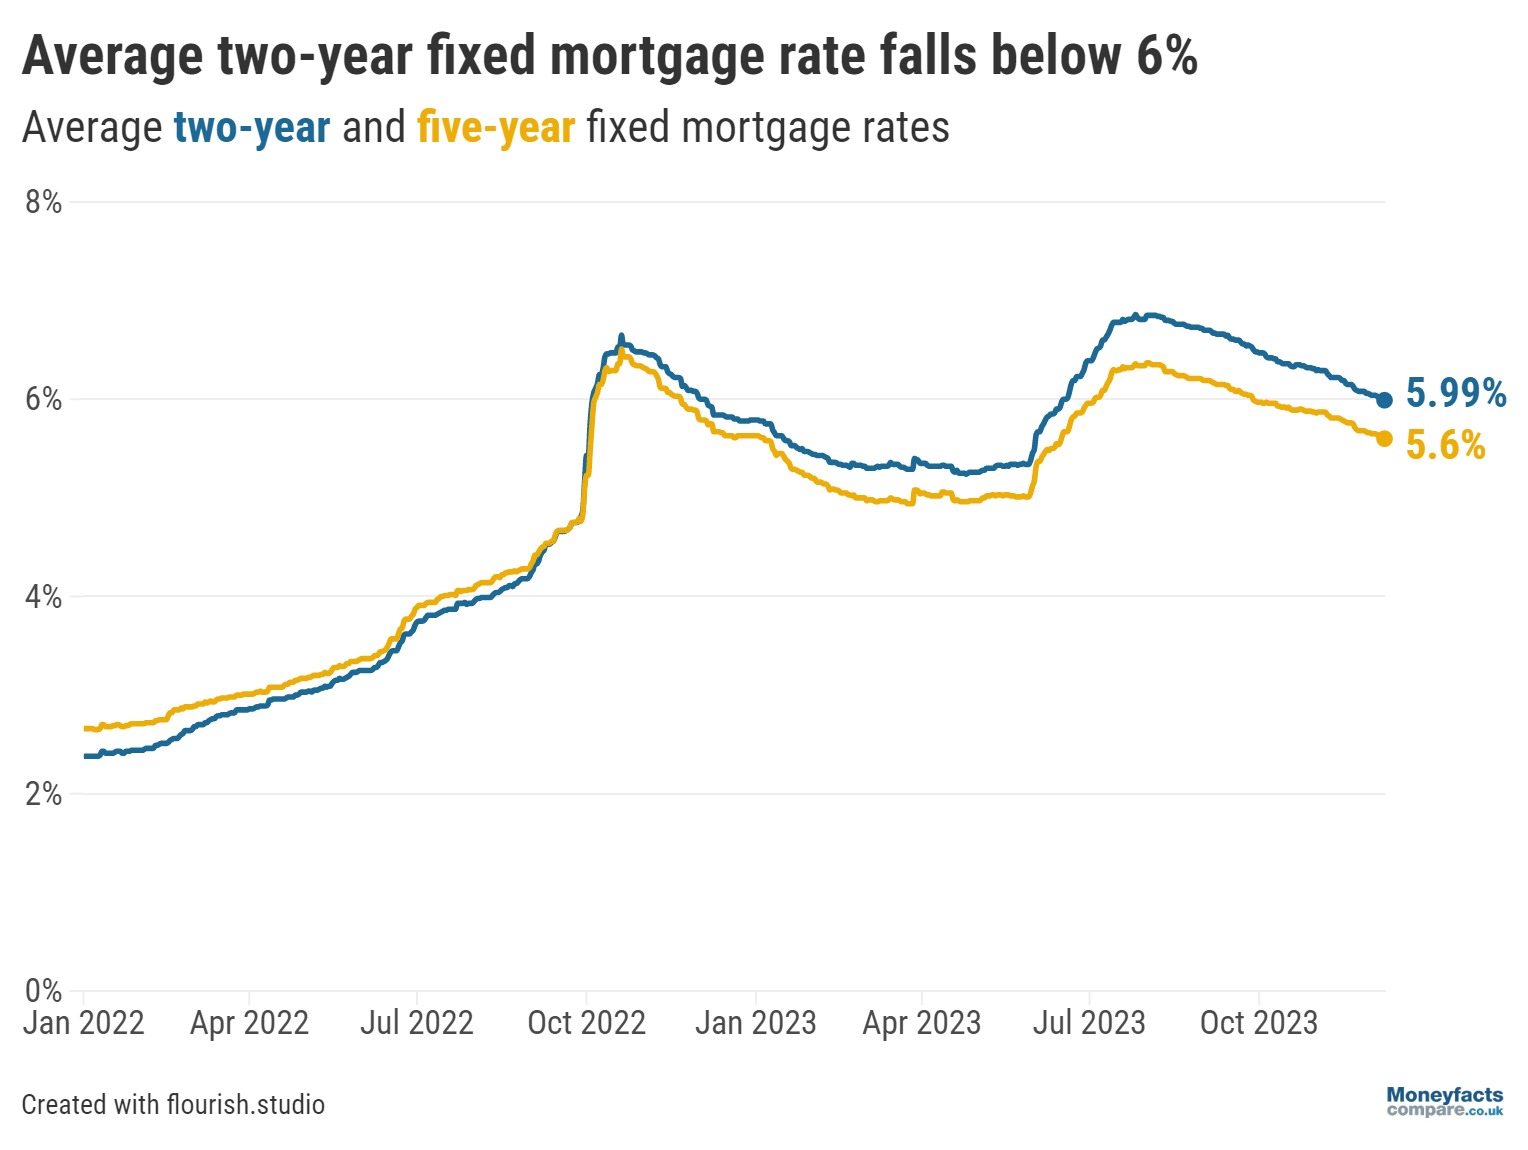 Average two-year fixed deal falls below 6%